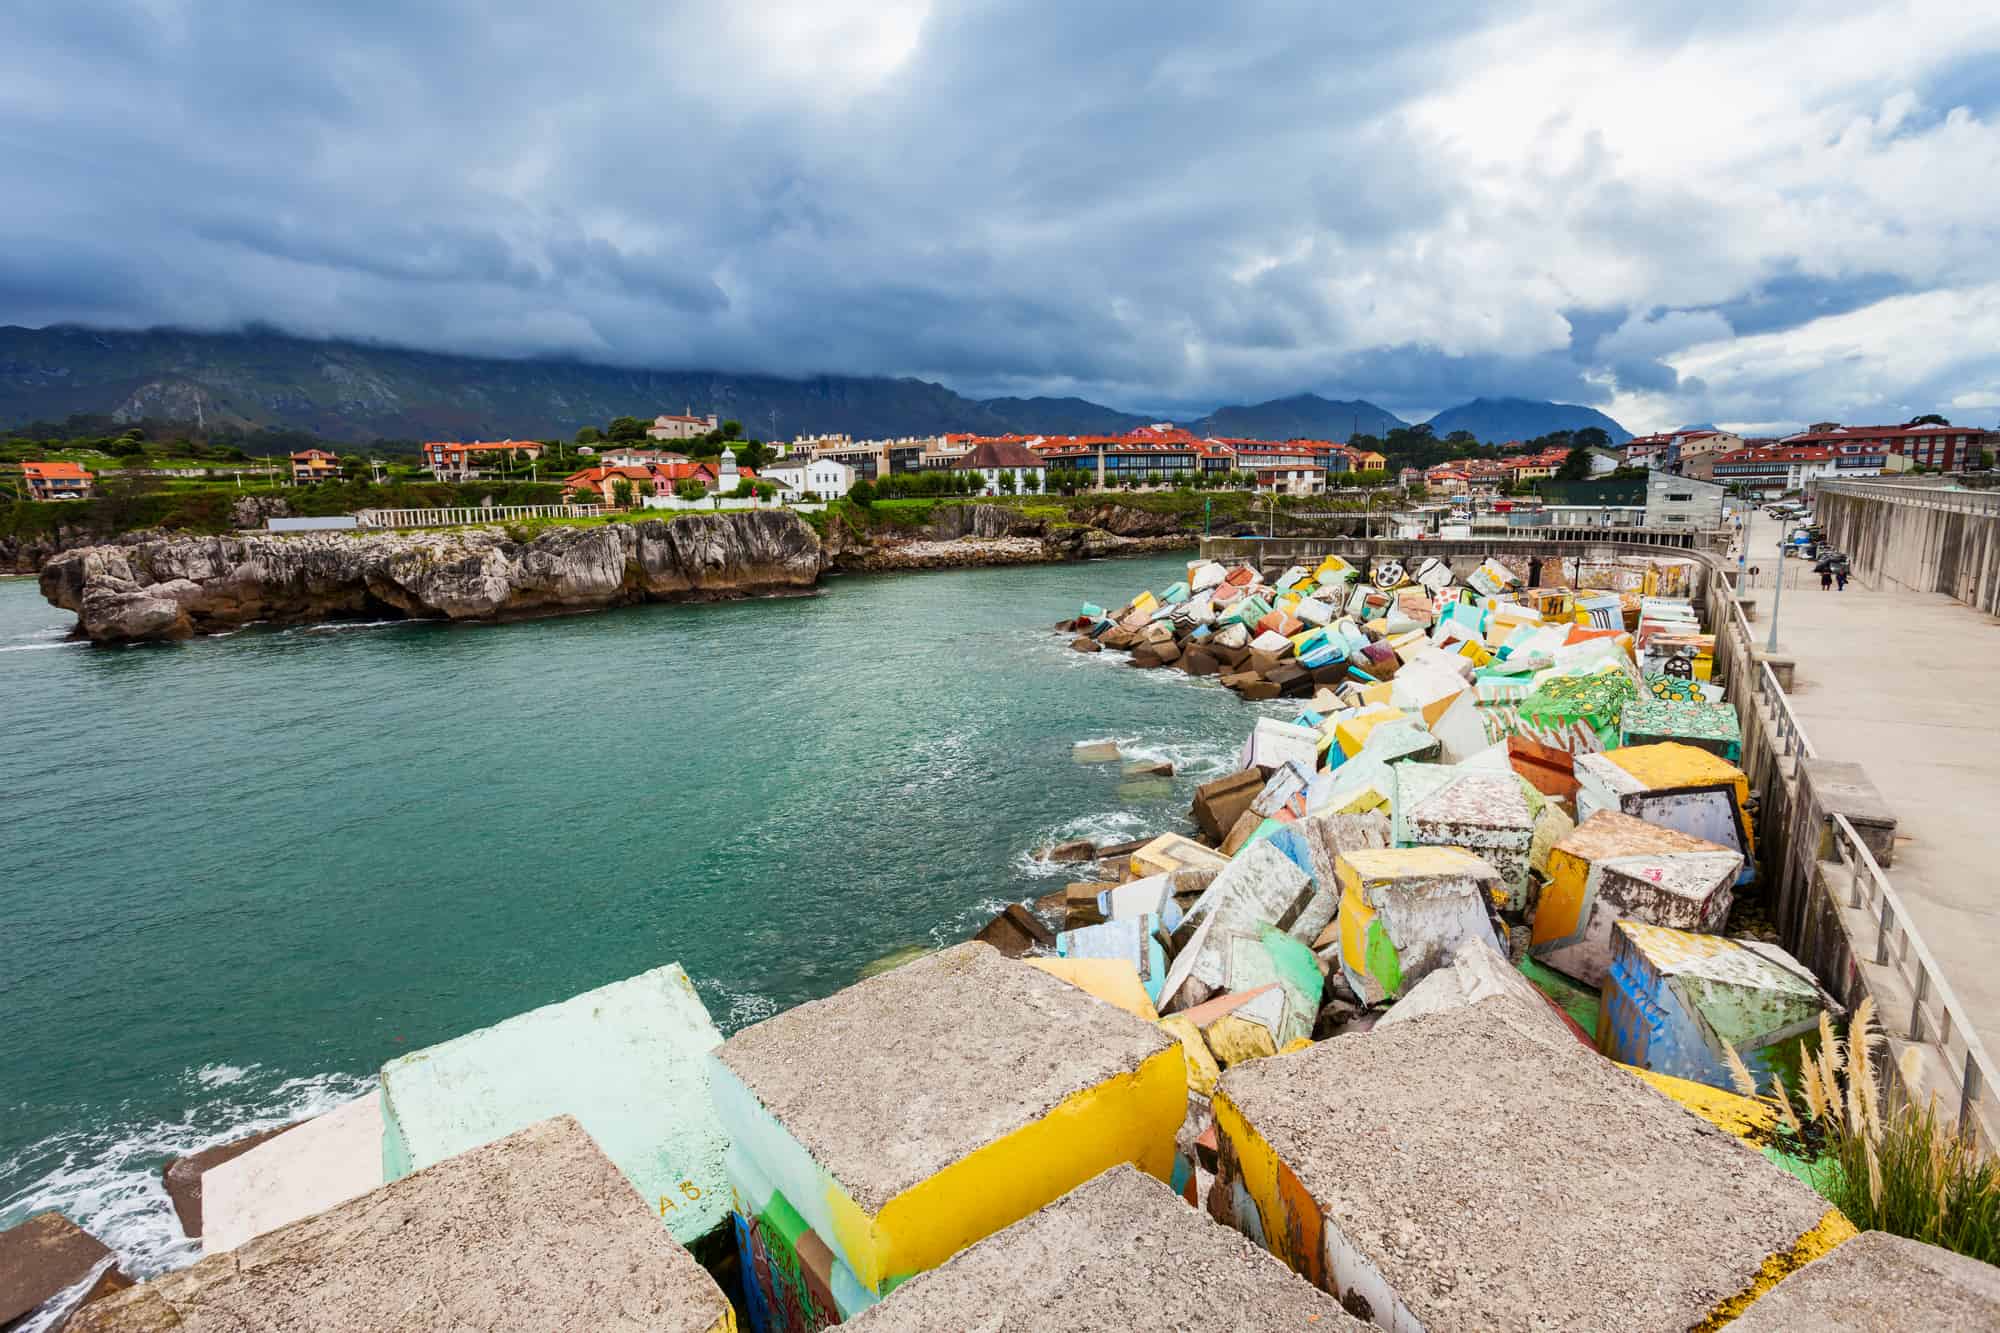 Memory Cubes at the pier in Llanes city, Asturias province in northern Spain